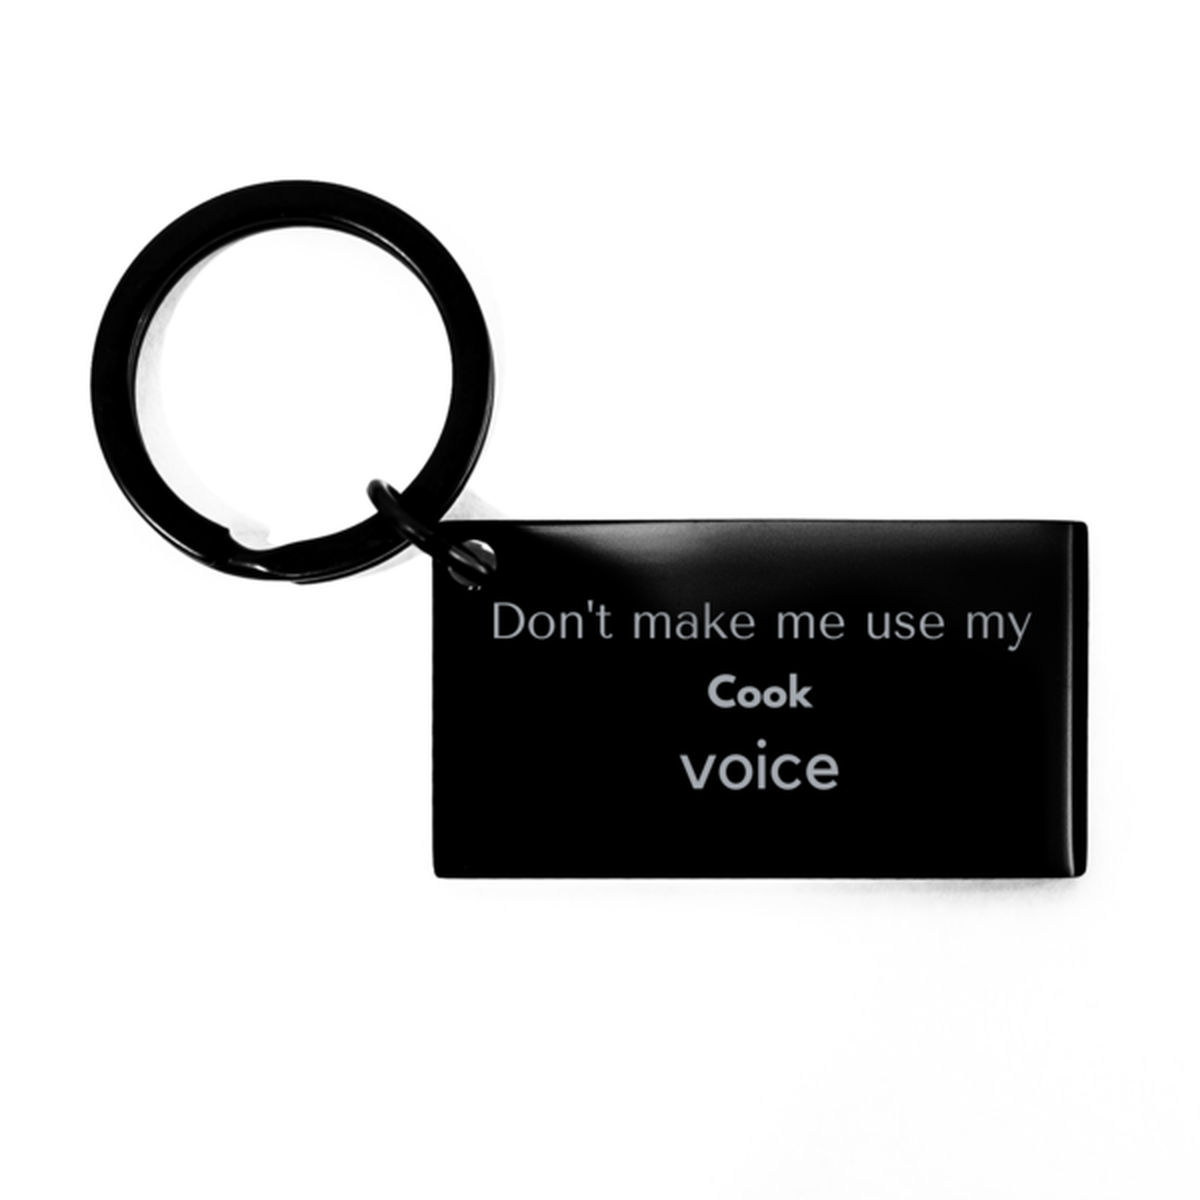 Don't make me use my Cook voice, Sarcasm Cook Gifts, Christmas Cook Keychain Birthday Unique Gifts For Cook Coworkers, Men, Women, Colleague, Friends